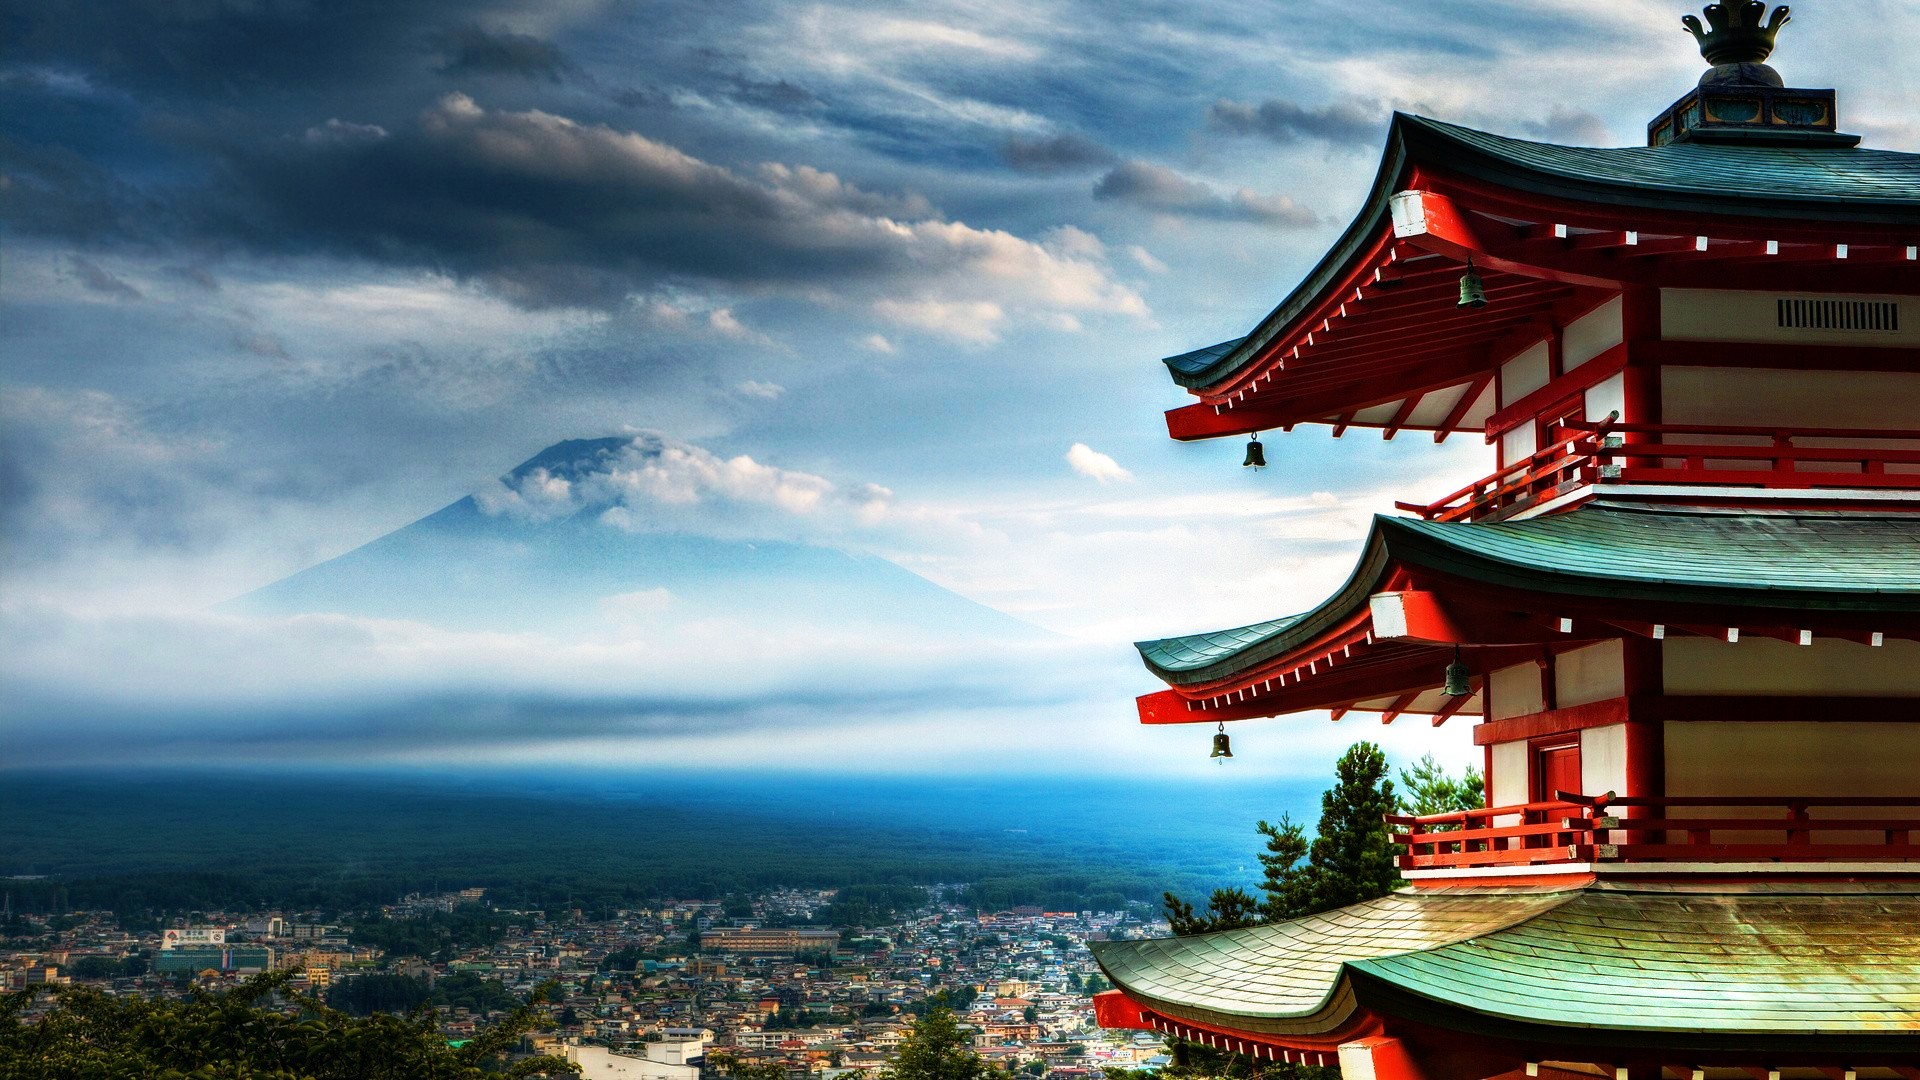 japan wallpaper 1920x1080,chinese architecture,sky,japanese architecture,pagoda,cloud